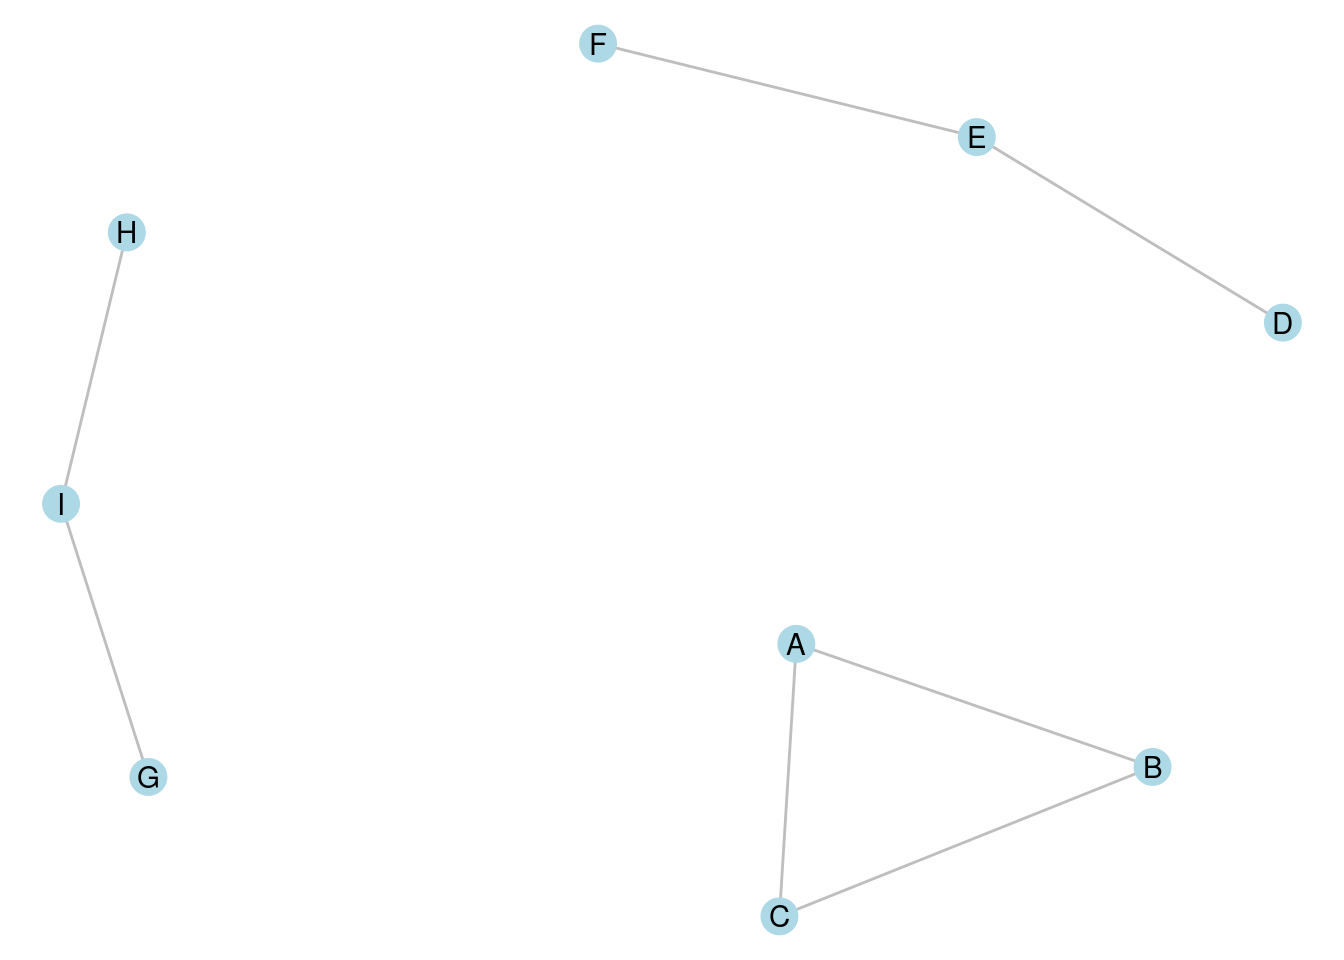 A graph with three connected components, each containing three vertices